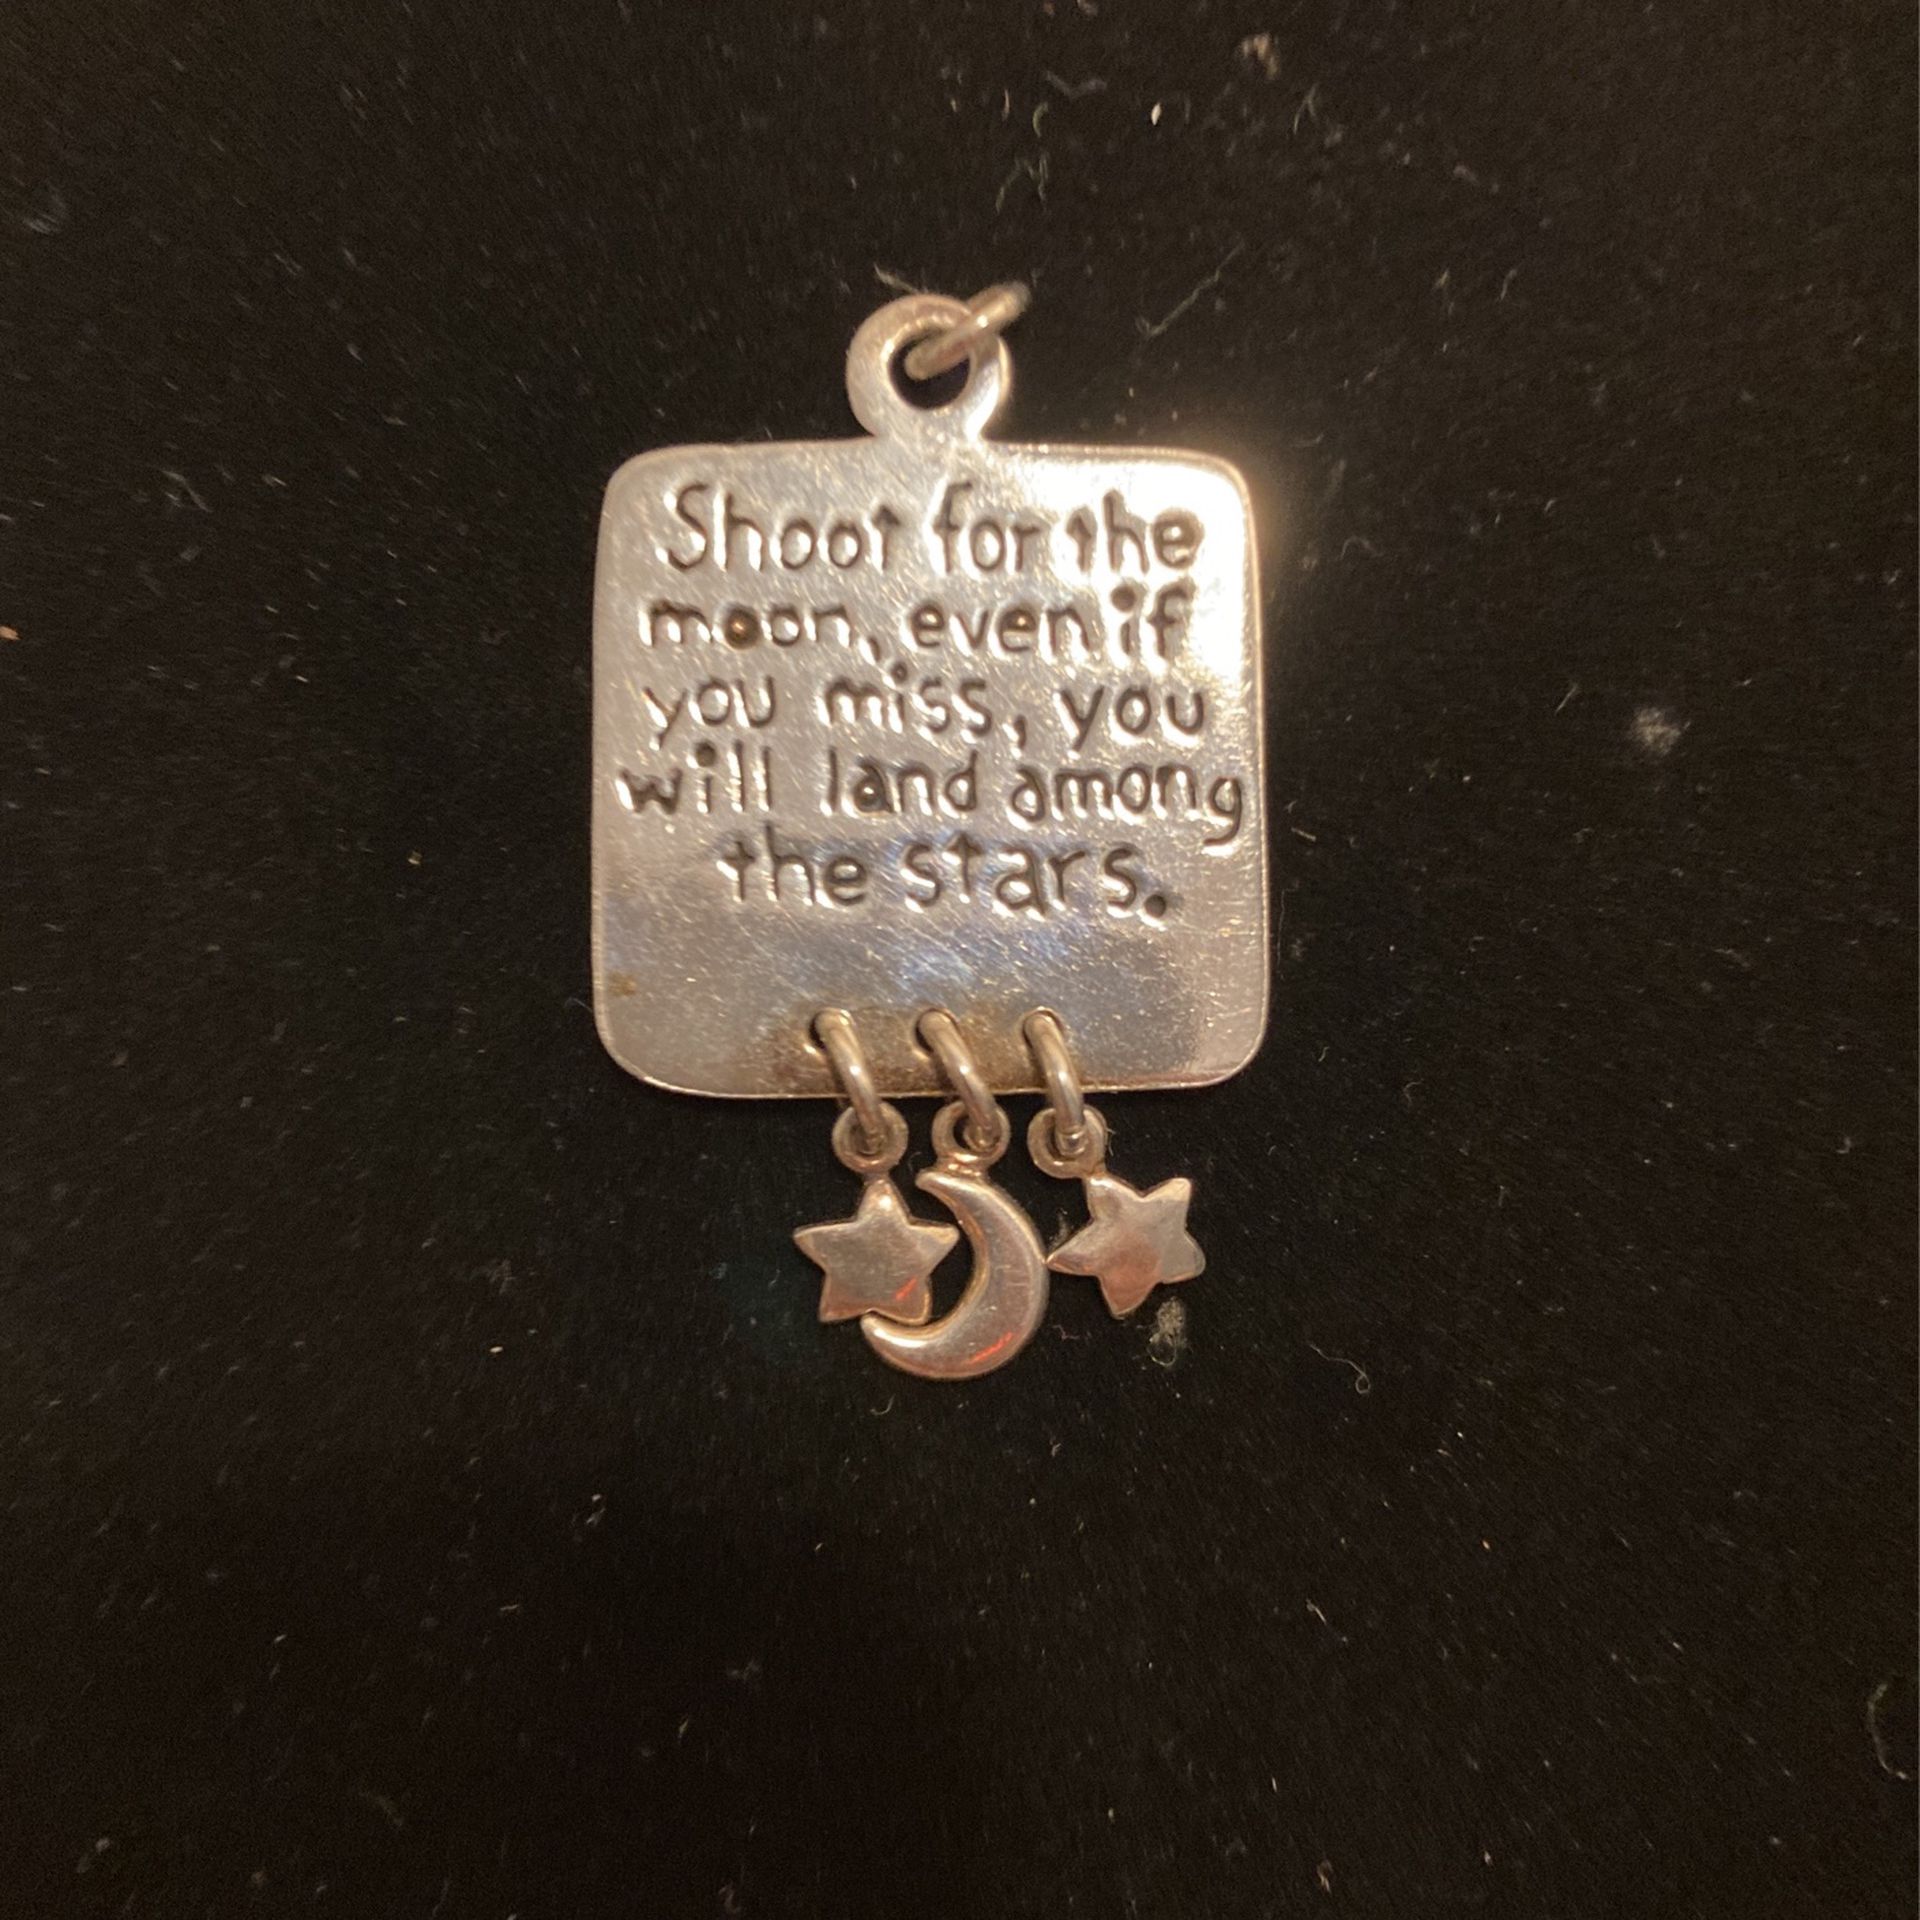 Vintage Sterling Pendant - Shoot For The Stars W/charms - Very Cute Item! #artssoflo